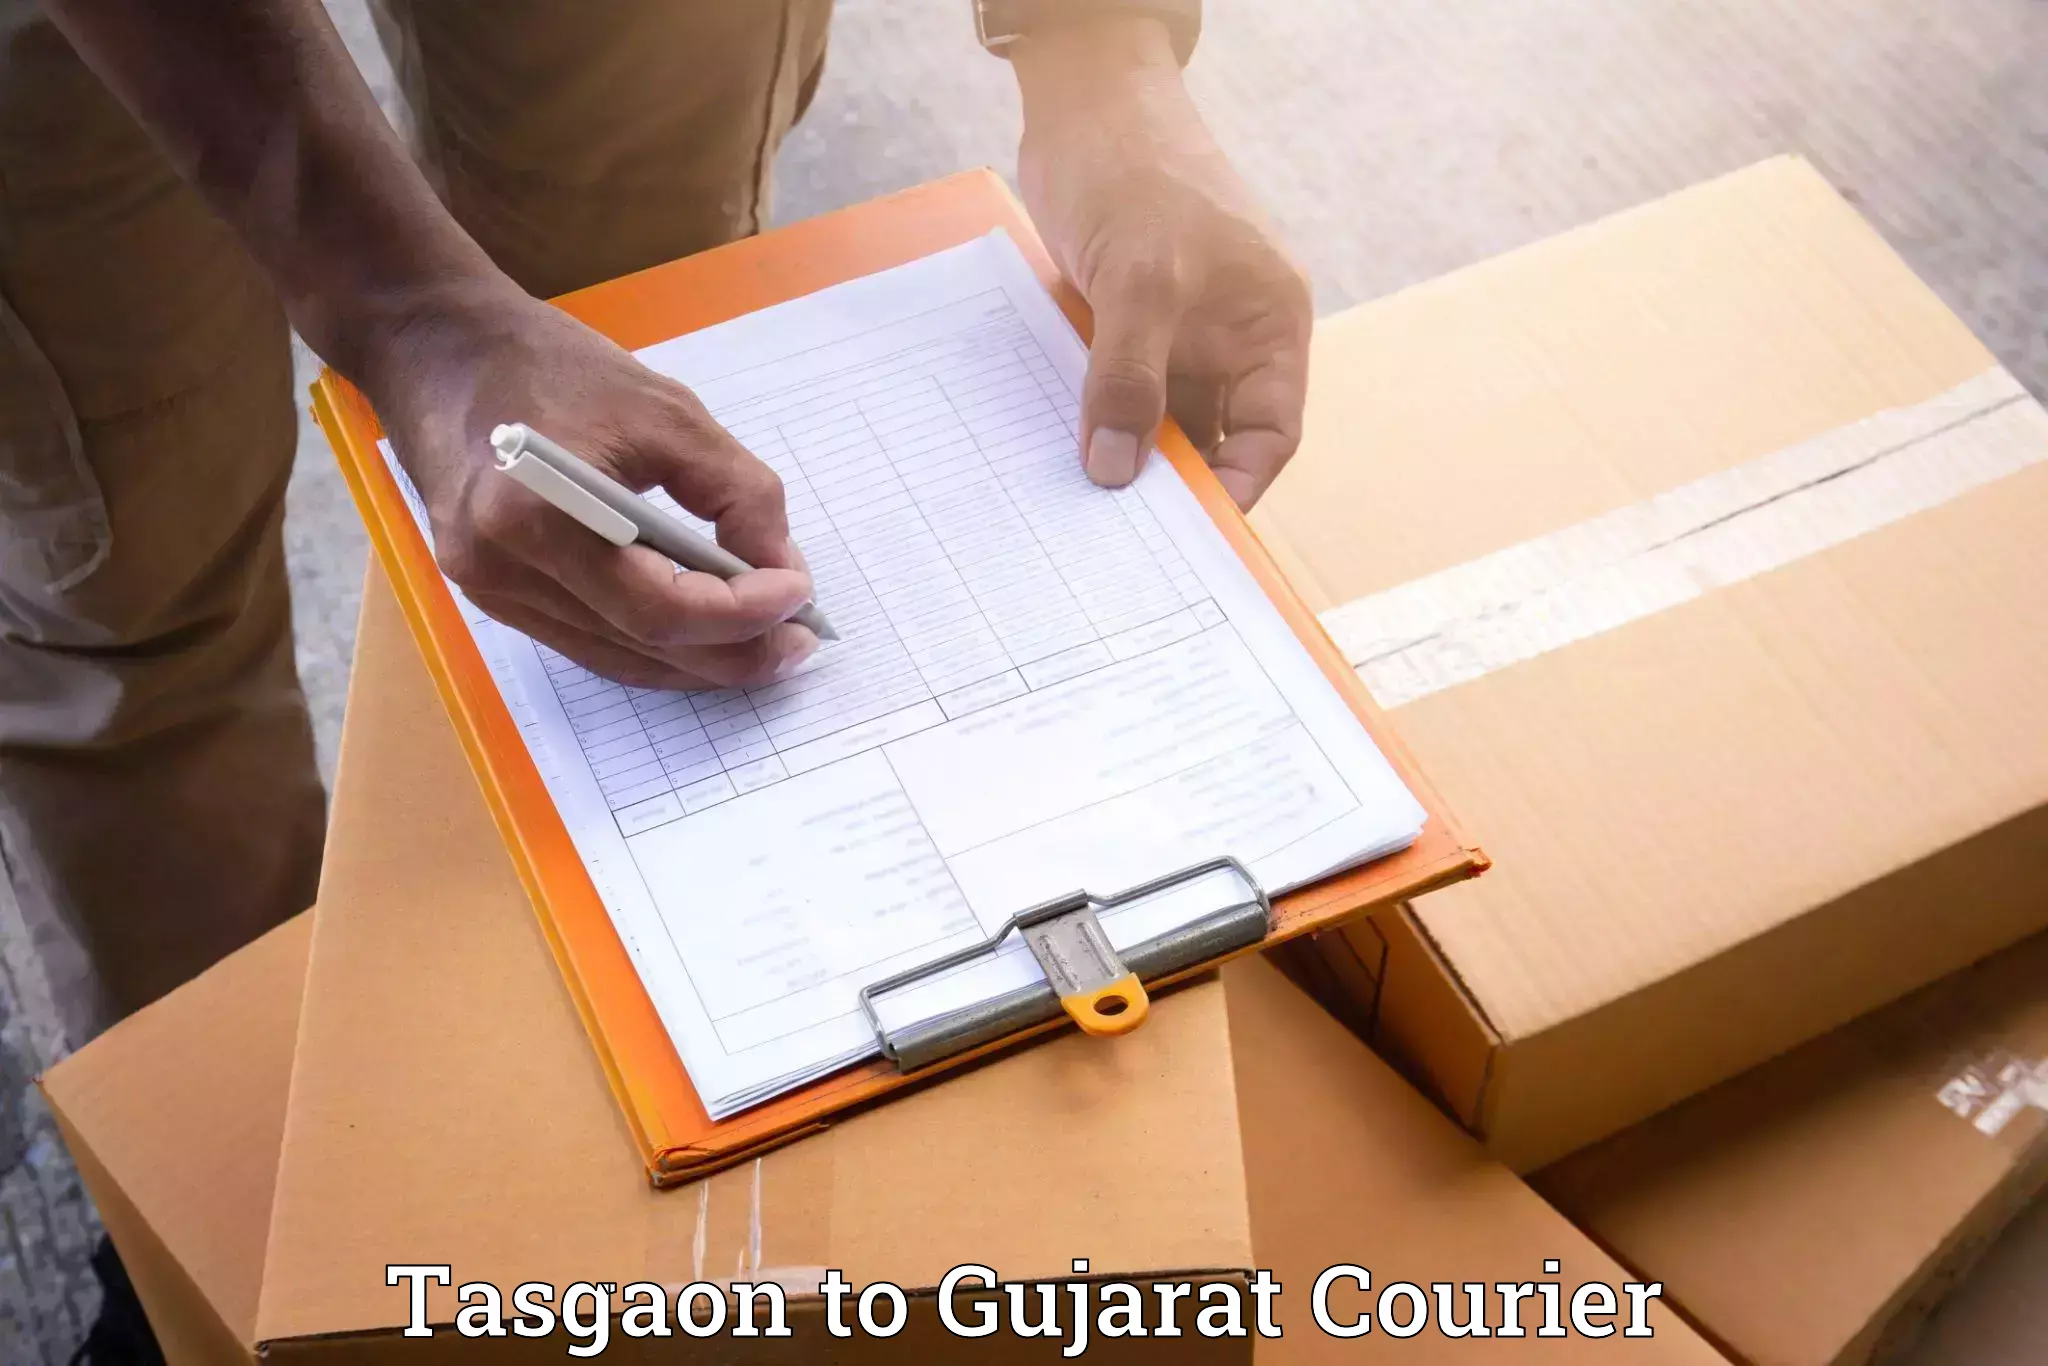 Professional relocation services Tasgaon to Deesa